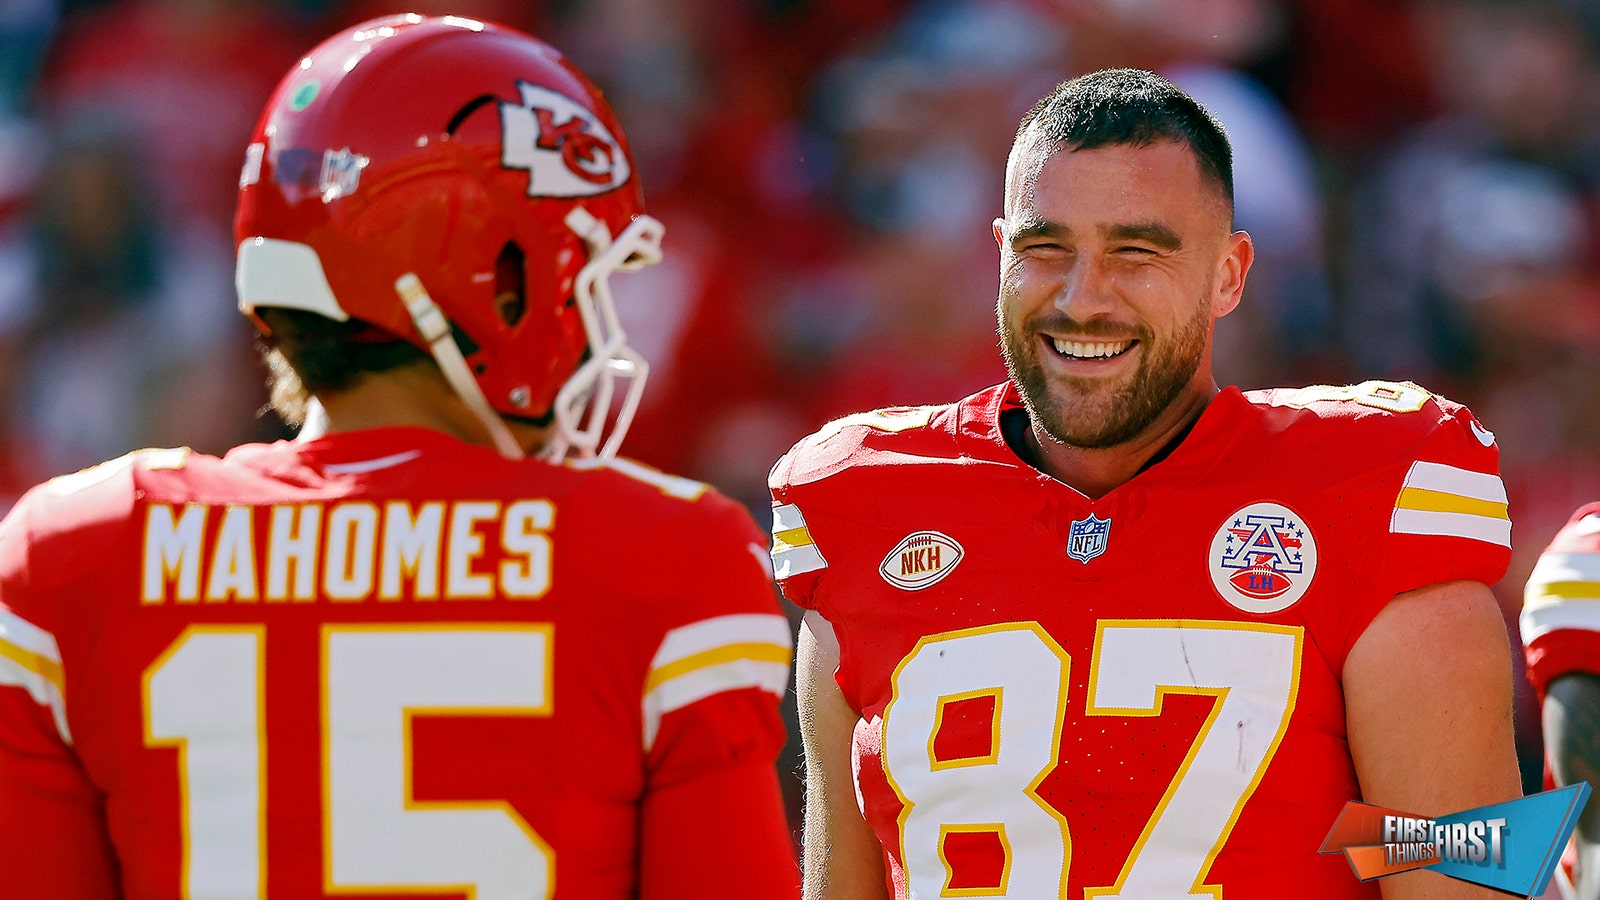 Patrick Mahomes & Travis Kelce dominant in Chiefs win vs. Chargers 